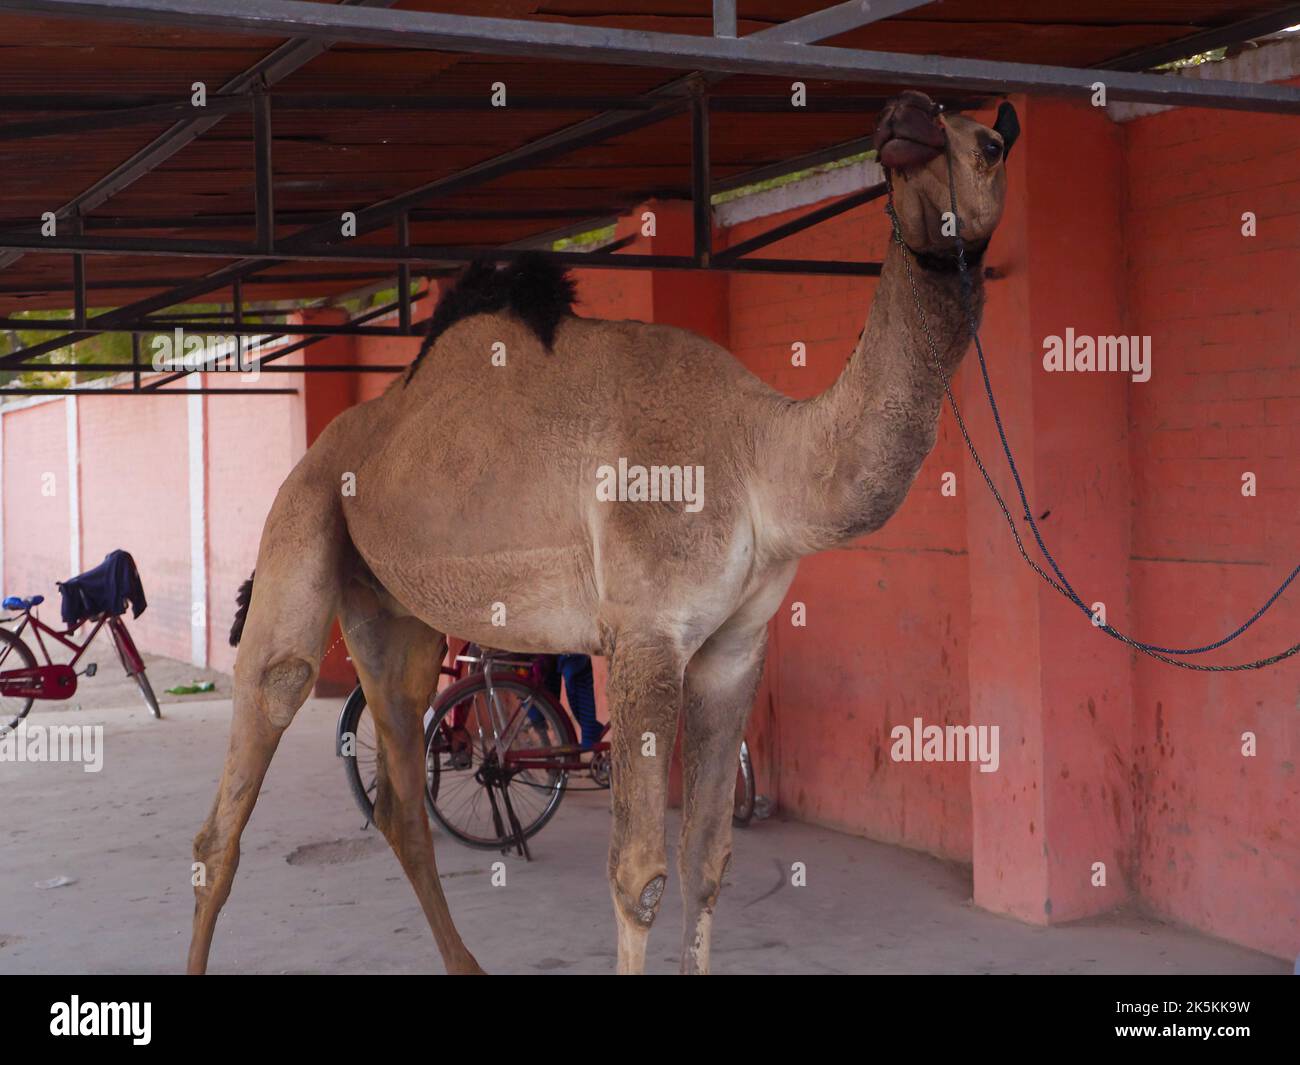 Camel tied by rope in Parking shed. Camel standing and resting in parking space. Stock Photo